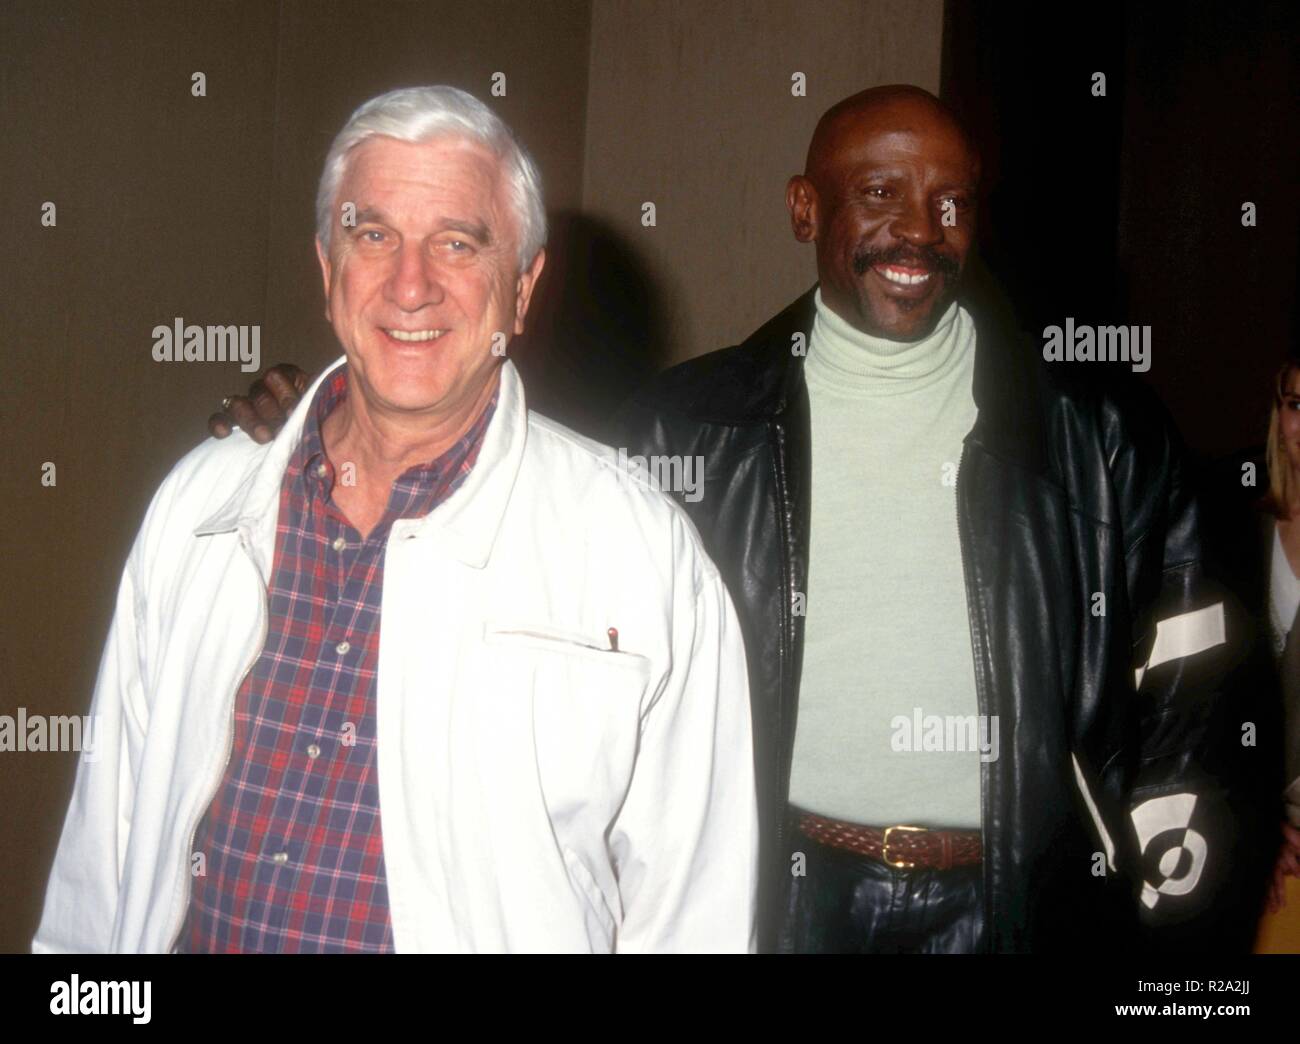 BEVERLY HILLS, CA - JANUARY 23: Actor Leslie Nielsen  and actor Lou Gossett Jr. attend the 50th Annual Golden Globe Awards on January 23, 1993 at the Beverly Hilton Hotel in Beverly Hills, California. Photo by Barry King/Alamy Stock Photo Stock Photo